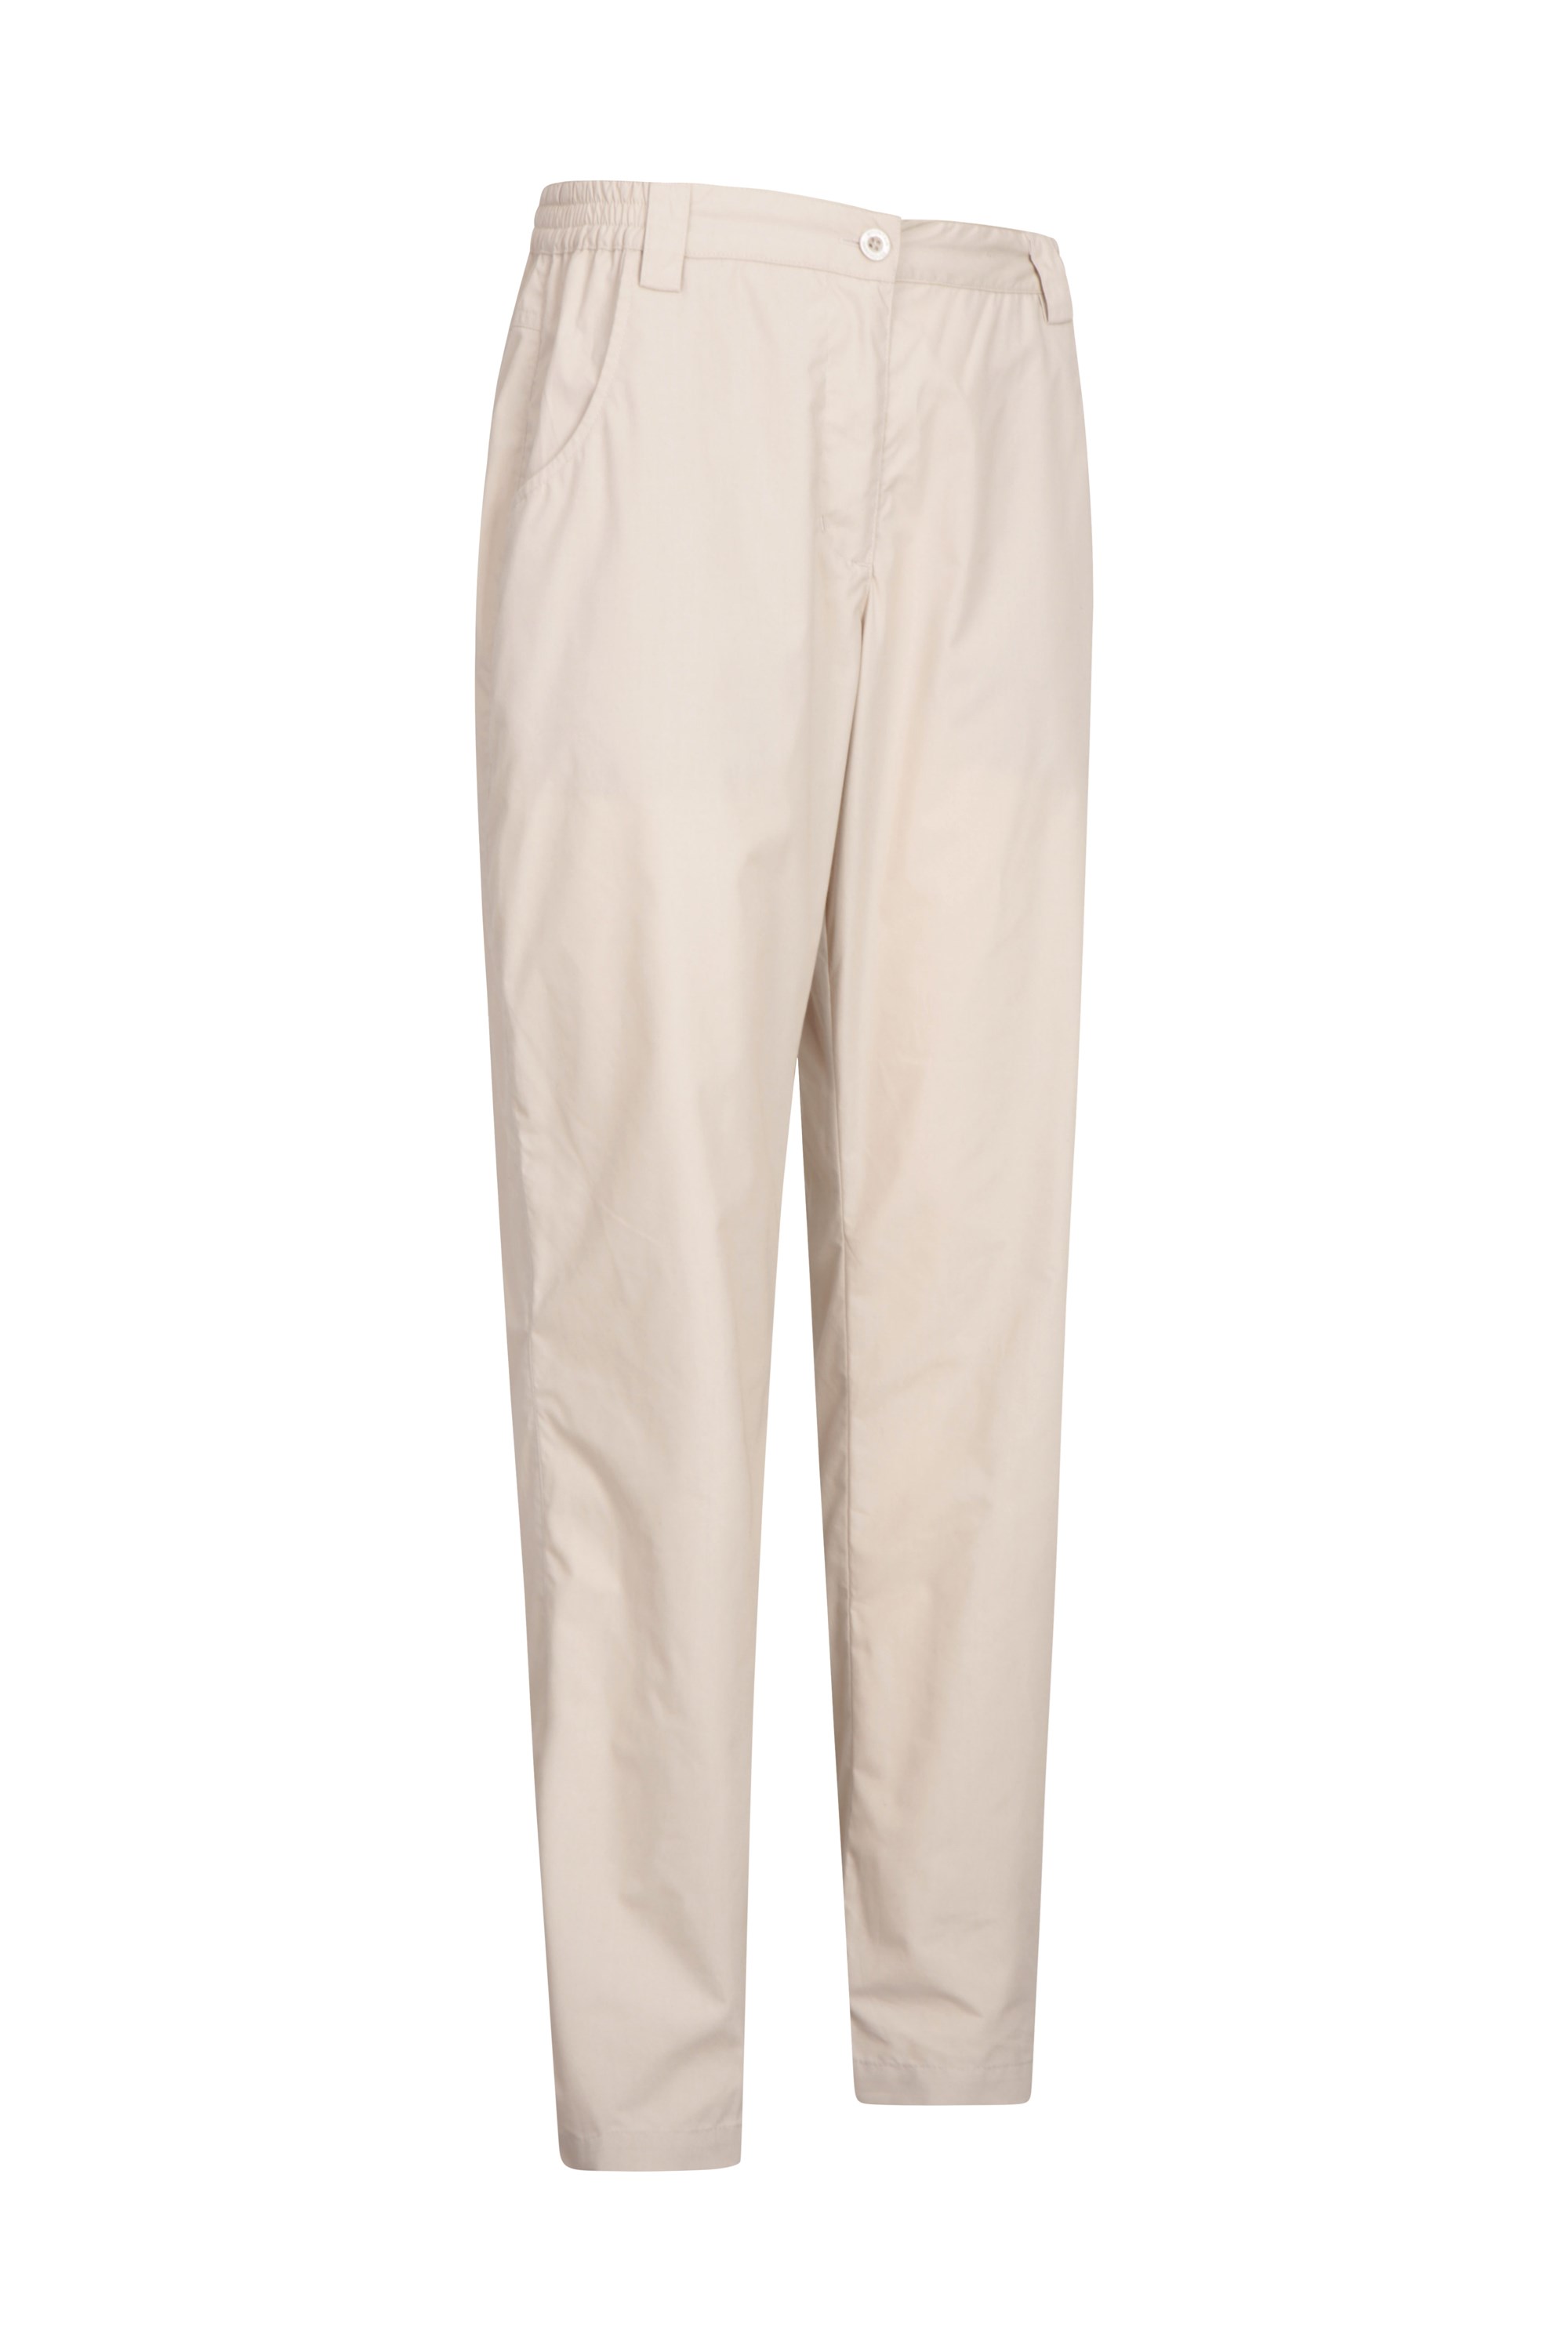 Quest Womens Zip-Off Trousers